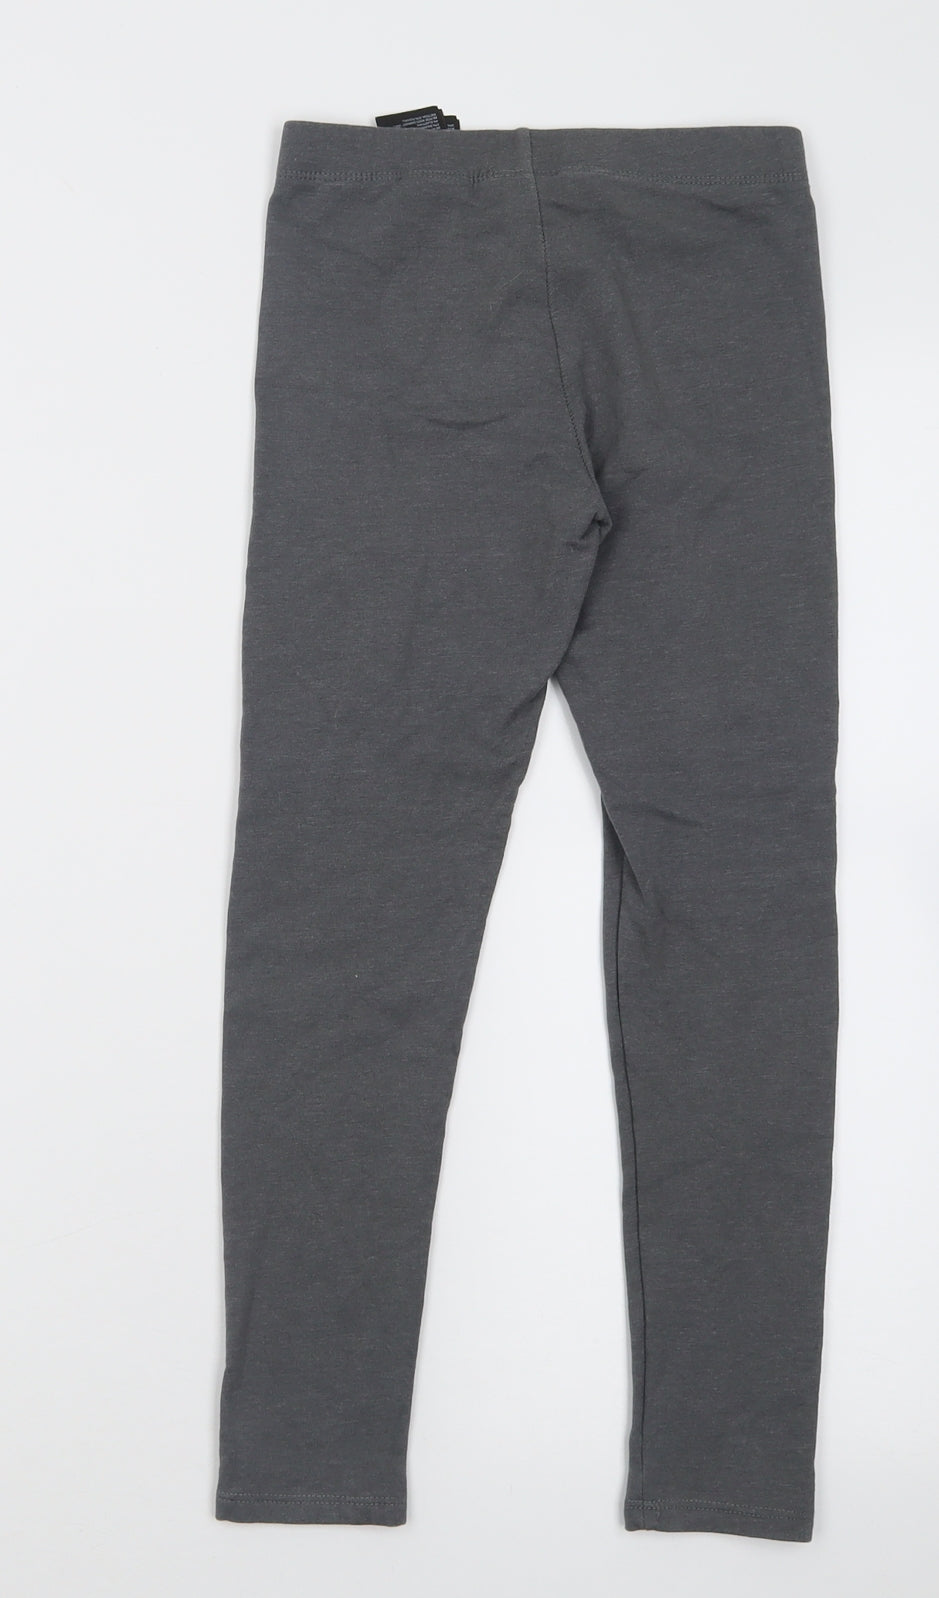 H&M Girls Grey  Cotton Capri Trousers Size 8-9 Years  Regular Pullover - Thick material